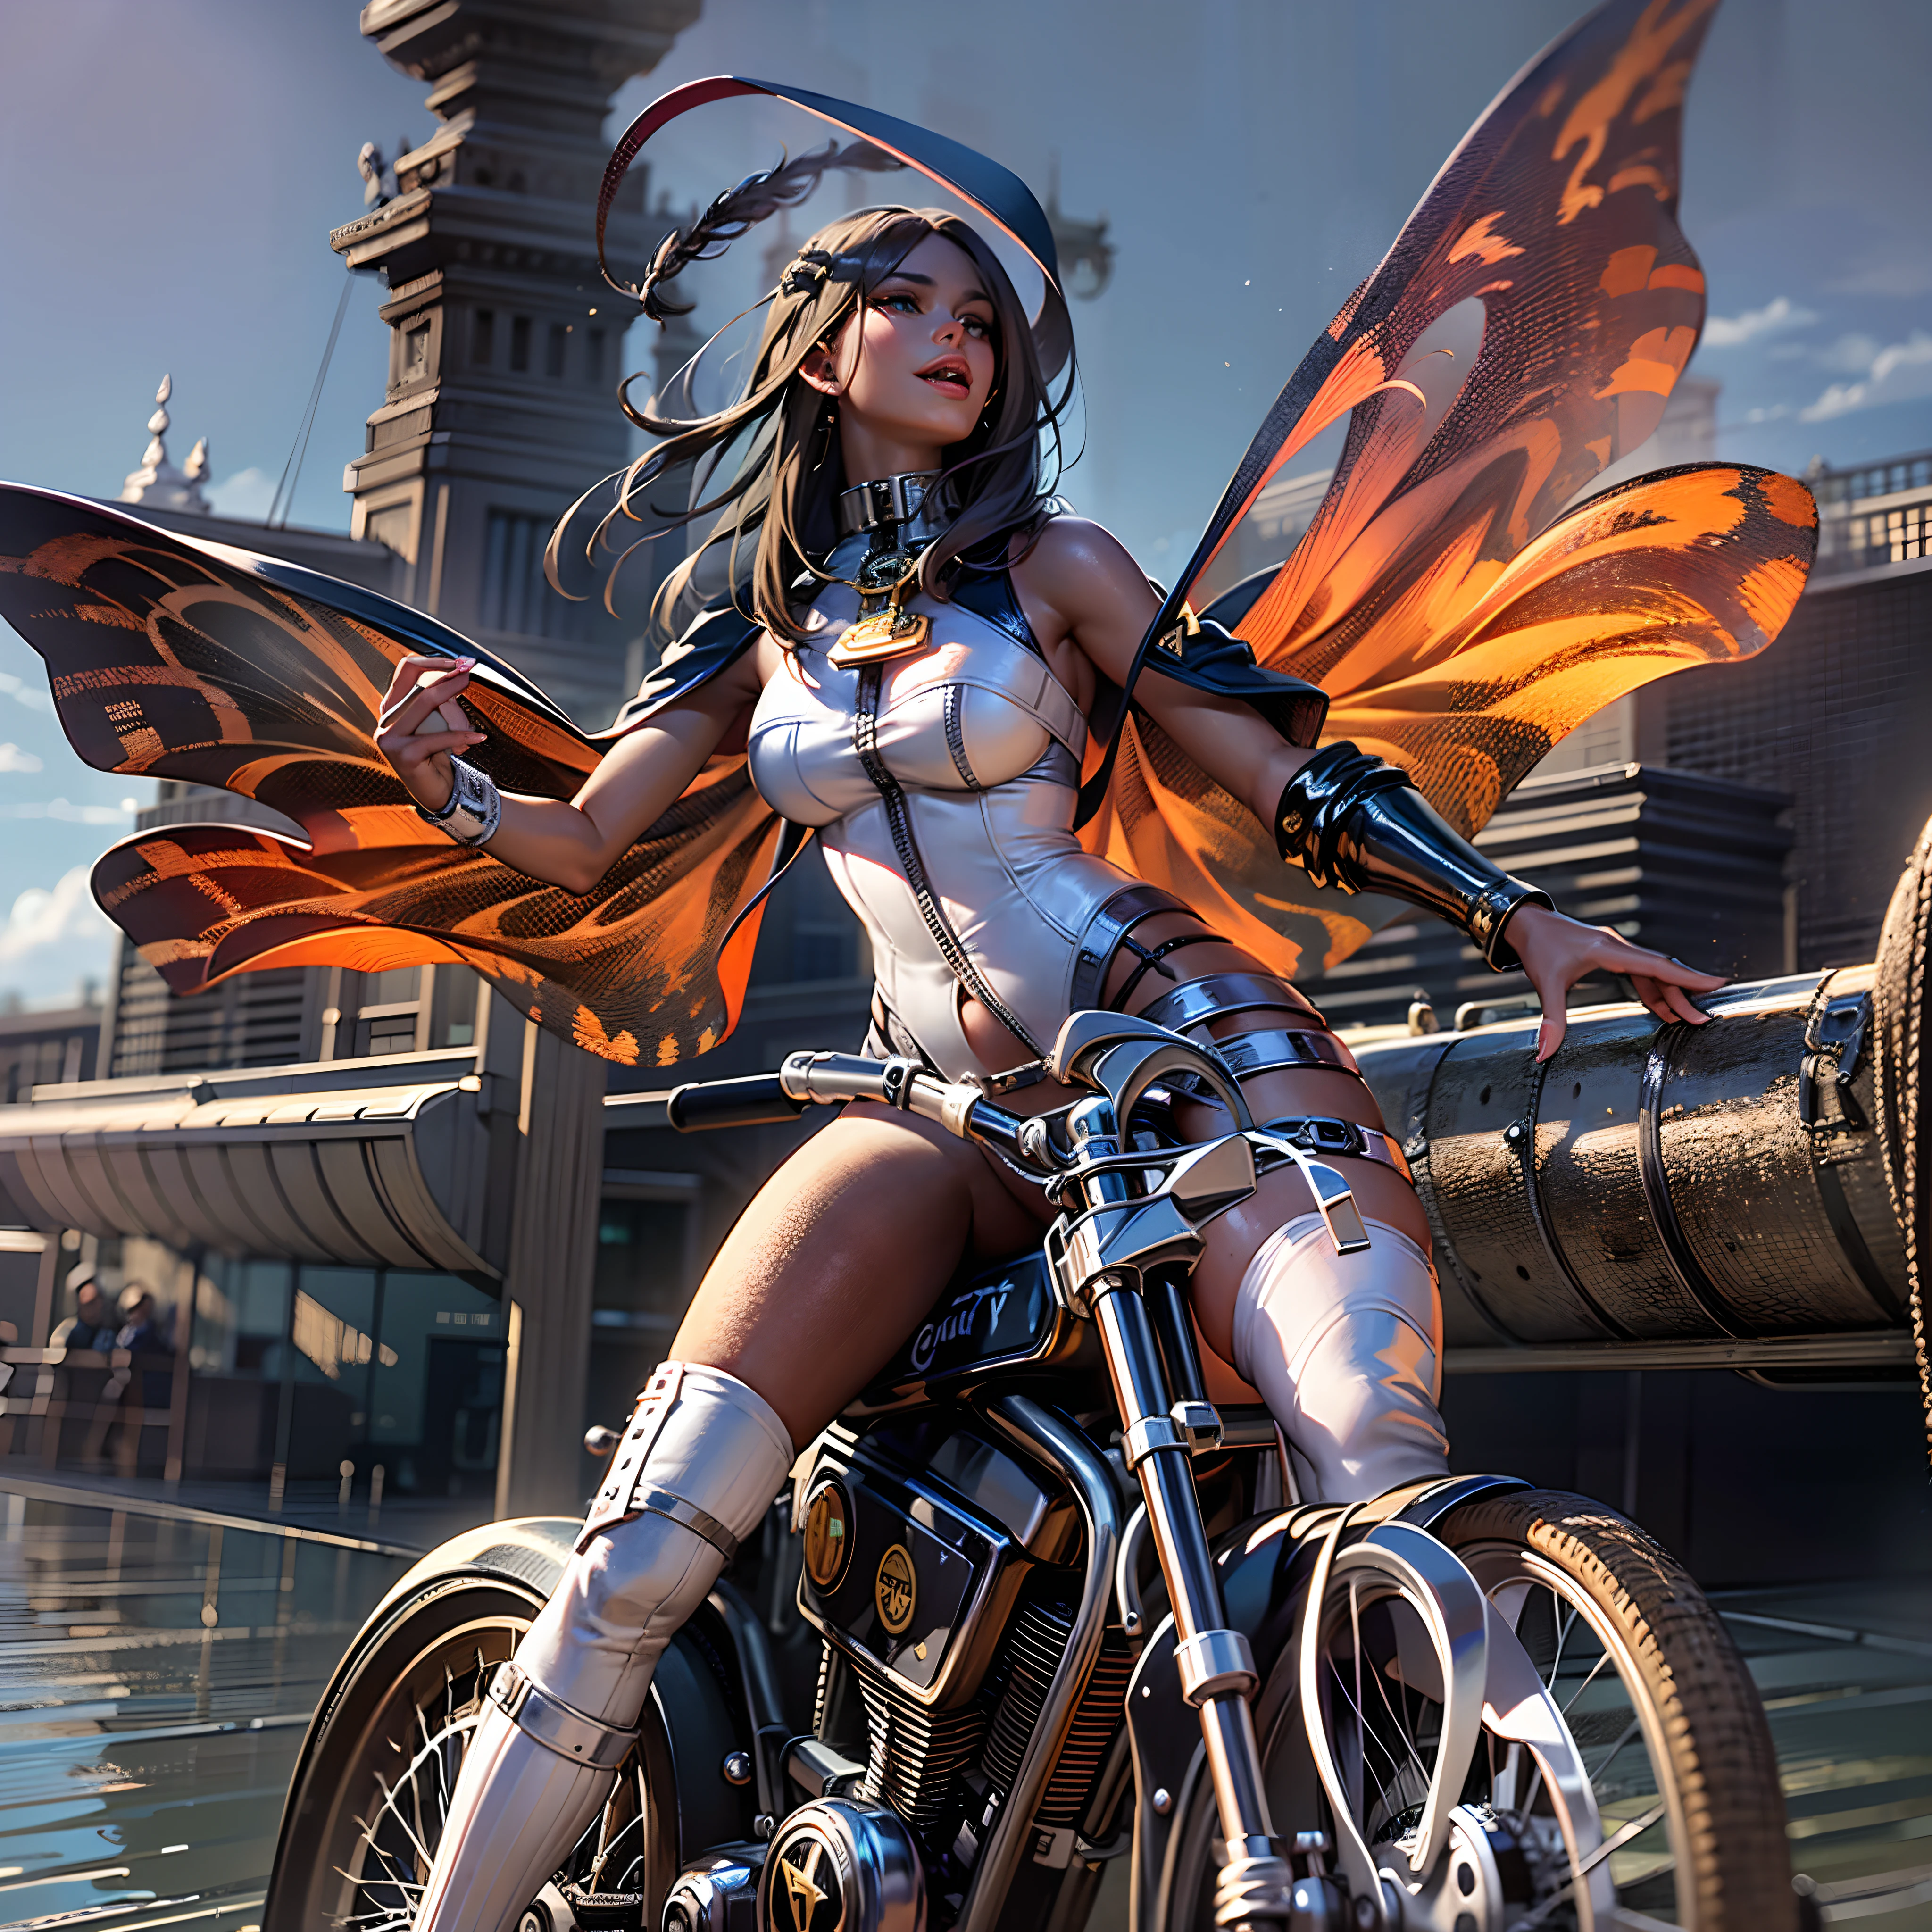 Sun epic Masterpiece Ocean Sea sunlight backlight Goddess Beach deep path beholder outdoor mounted motorcycle_Harley_Davidson Suncraft Artificier hearth sundrop urban Equirectangular_360 "Armada" contre-jours moto "Heavy Metal" Devastating Will-o'-the-wisp iota pixie sprite luminescence war battle mature female "luis Royo" dazzling ride bike, Cosplay riders richesse Amiral decorated "Nicki Minaj" Commander jukebox Pilots jacket cow-boy flag Earth sunLight ultra pro-Photorealistic optimal ultra_high_quality opengl-shaders ultra_high_detail accurate reflex ultra_high-resolution perfection graduates volumetric lightning improved Octane_rendues UHD XT3 K 32K DSLR HDR UnrealEngine5 3dcg shadow Diva analogiques hairstyle dreads bangs extatiques symmetrical athletic african body skin tanmed suave cheekbones effects embarrassed glushes eye-liner saphirs saturate gorgeous dark beautiful eyes black pupils brown iris lazulis turquoise open mouth teeth (tongue droplet water drop of water) obvious smiles choke Floating Jacket Eccentric Cape Levitating Shoulders-Off Shirt Lace Clavicles White Papillotes embroidered leathers breasts reveal sideboob satin livid yellow orange corsait thick felt skirts matching bristles ample swinging spinels navel waist belt-chastity revealing heart diamond padlock silver agate pubis scarlet pubis-hairy indigo bristles protrusions silk Snap-lock tin gold garters thighs legs stainless steel boots gothic onyx, rubis summon milkweed floraison invoque viceroy magic incandescente creature CGSCOSITY butterfly Cristallines Wings (EOS R6 135mm 1/1250s f/2.8 ISO400) Monarch, Canon-ion flash blow glow opale impact, straight outfits armor heavy chrome flat rune lava bands population Tourmaline glyphe plasma cuivre "cyberpunk" background forest glass mirror monster Fire Blast Flame Engravings Chef-D&#39 tattoo (par Michelangelo) Bruce_Weber sex girls naked nsfw varied multi etc.